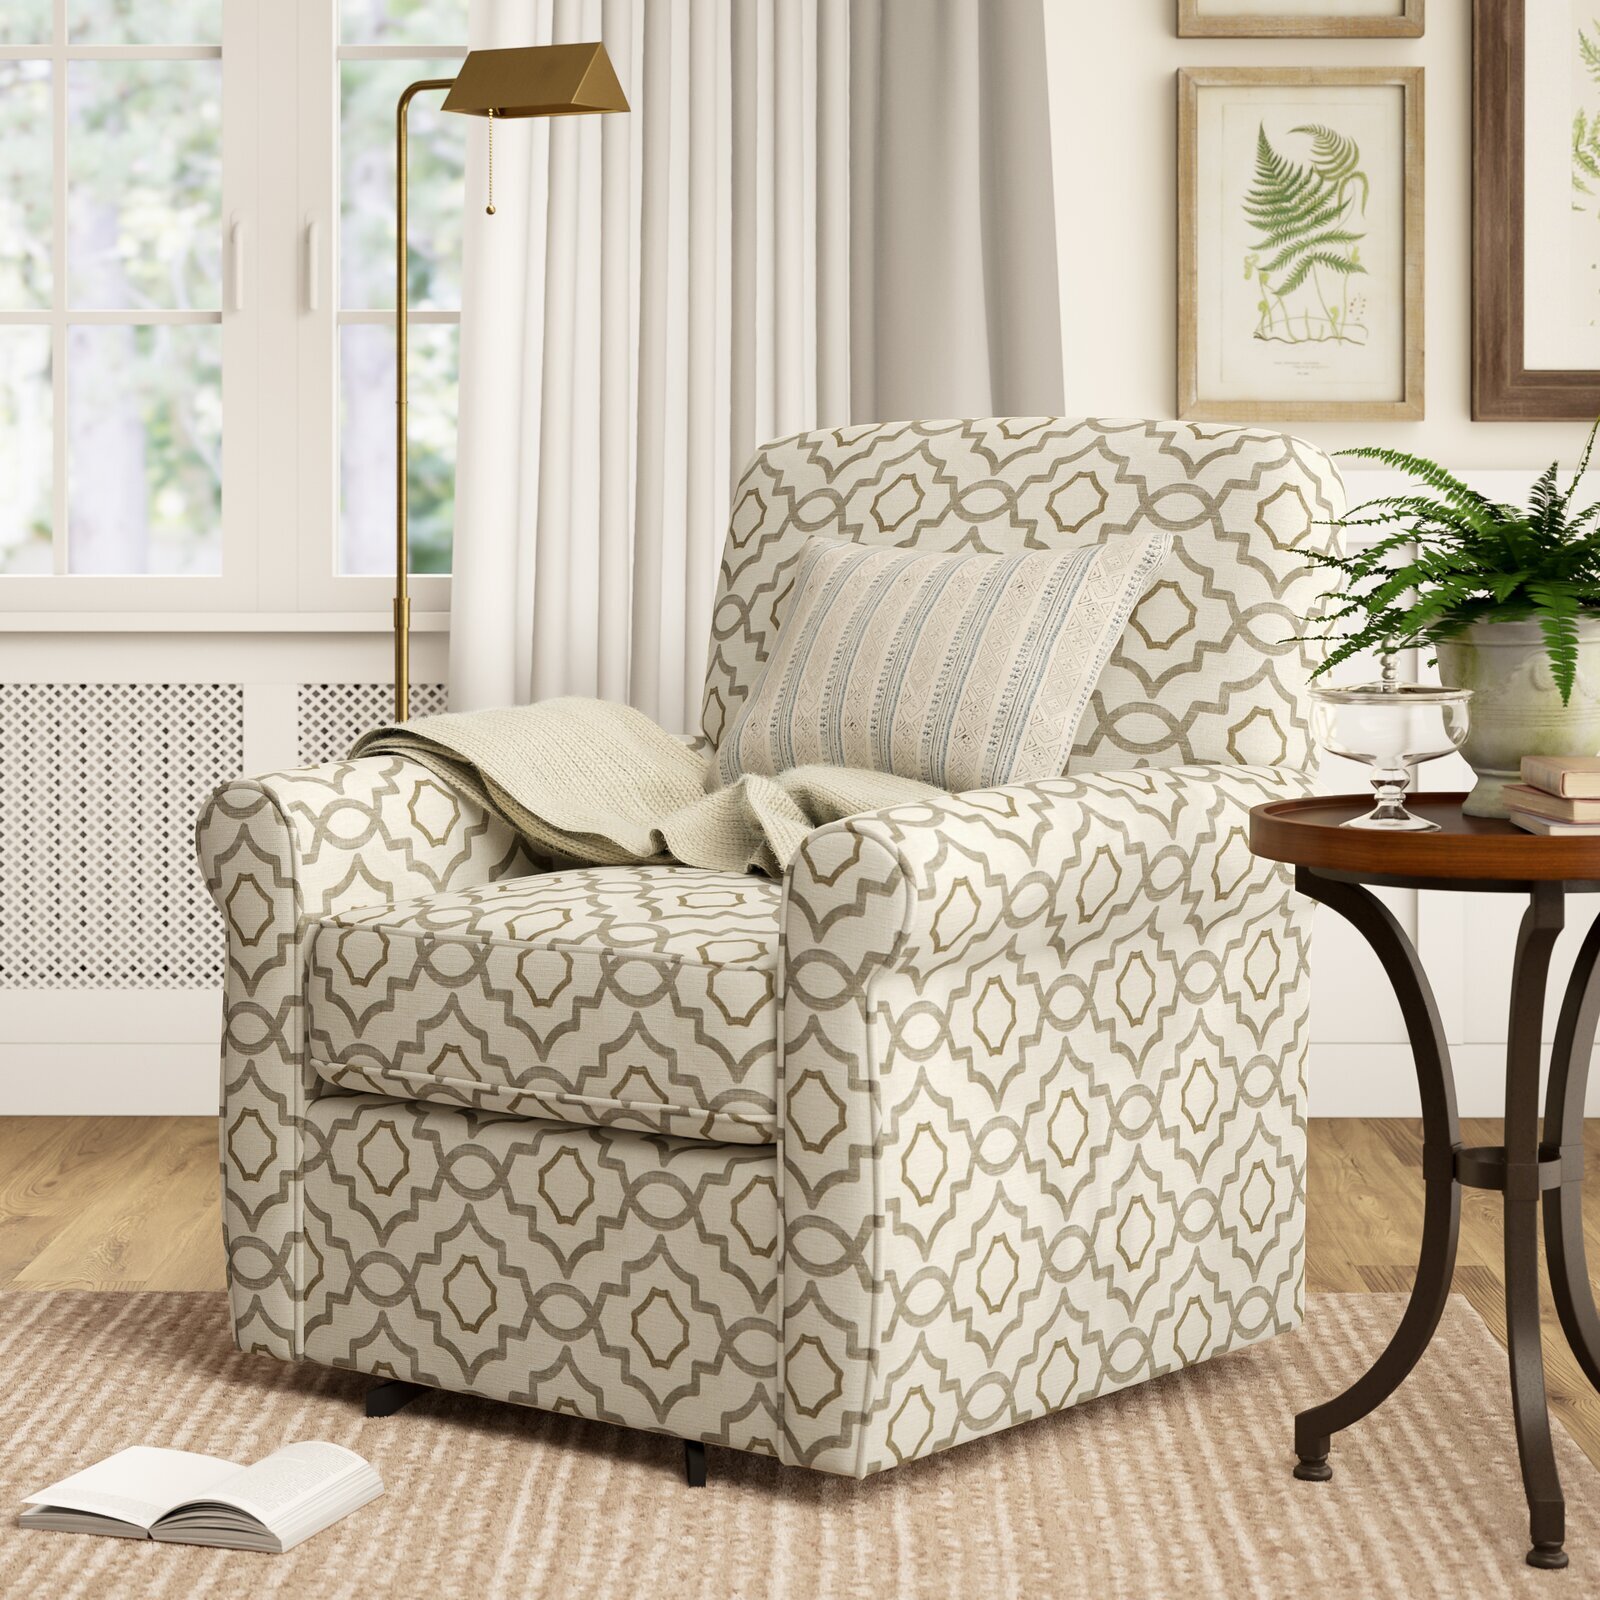 A farmhouse chic big round chair with patterned upholstery